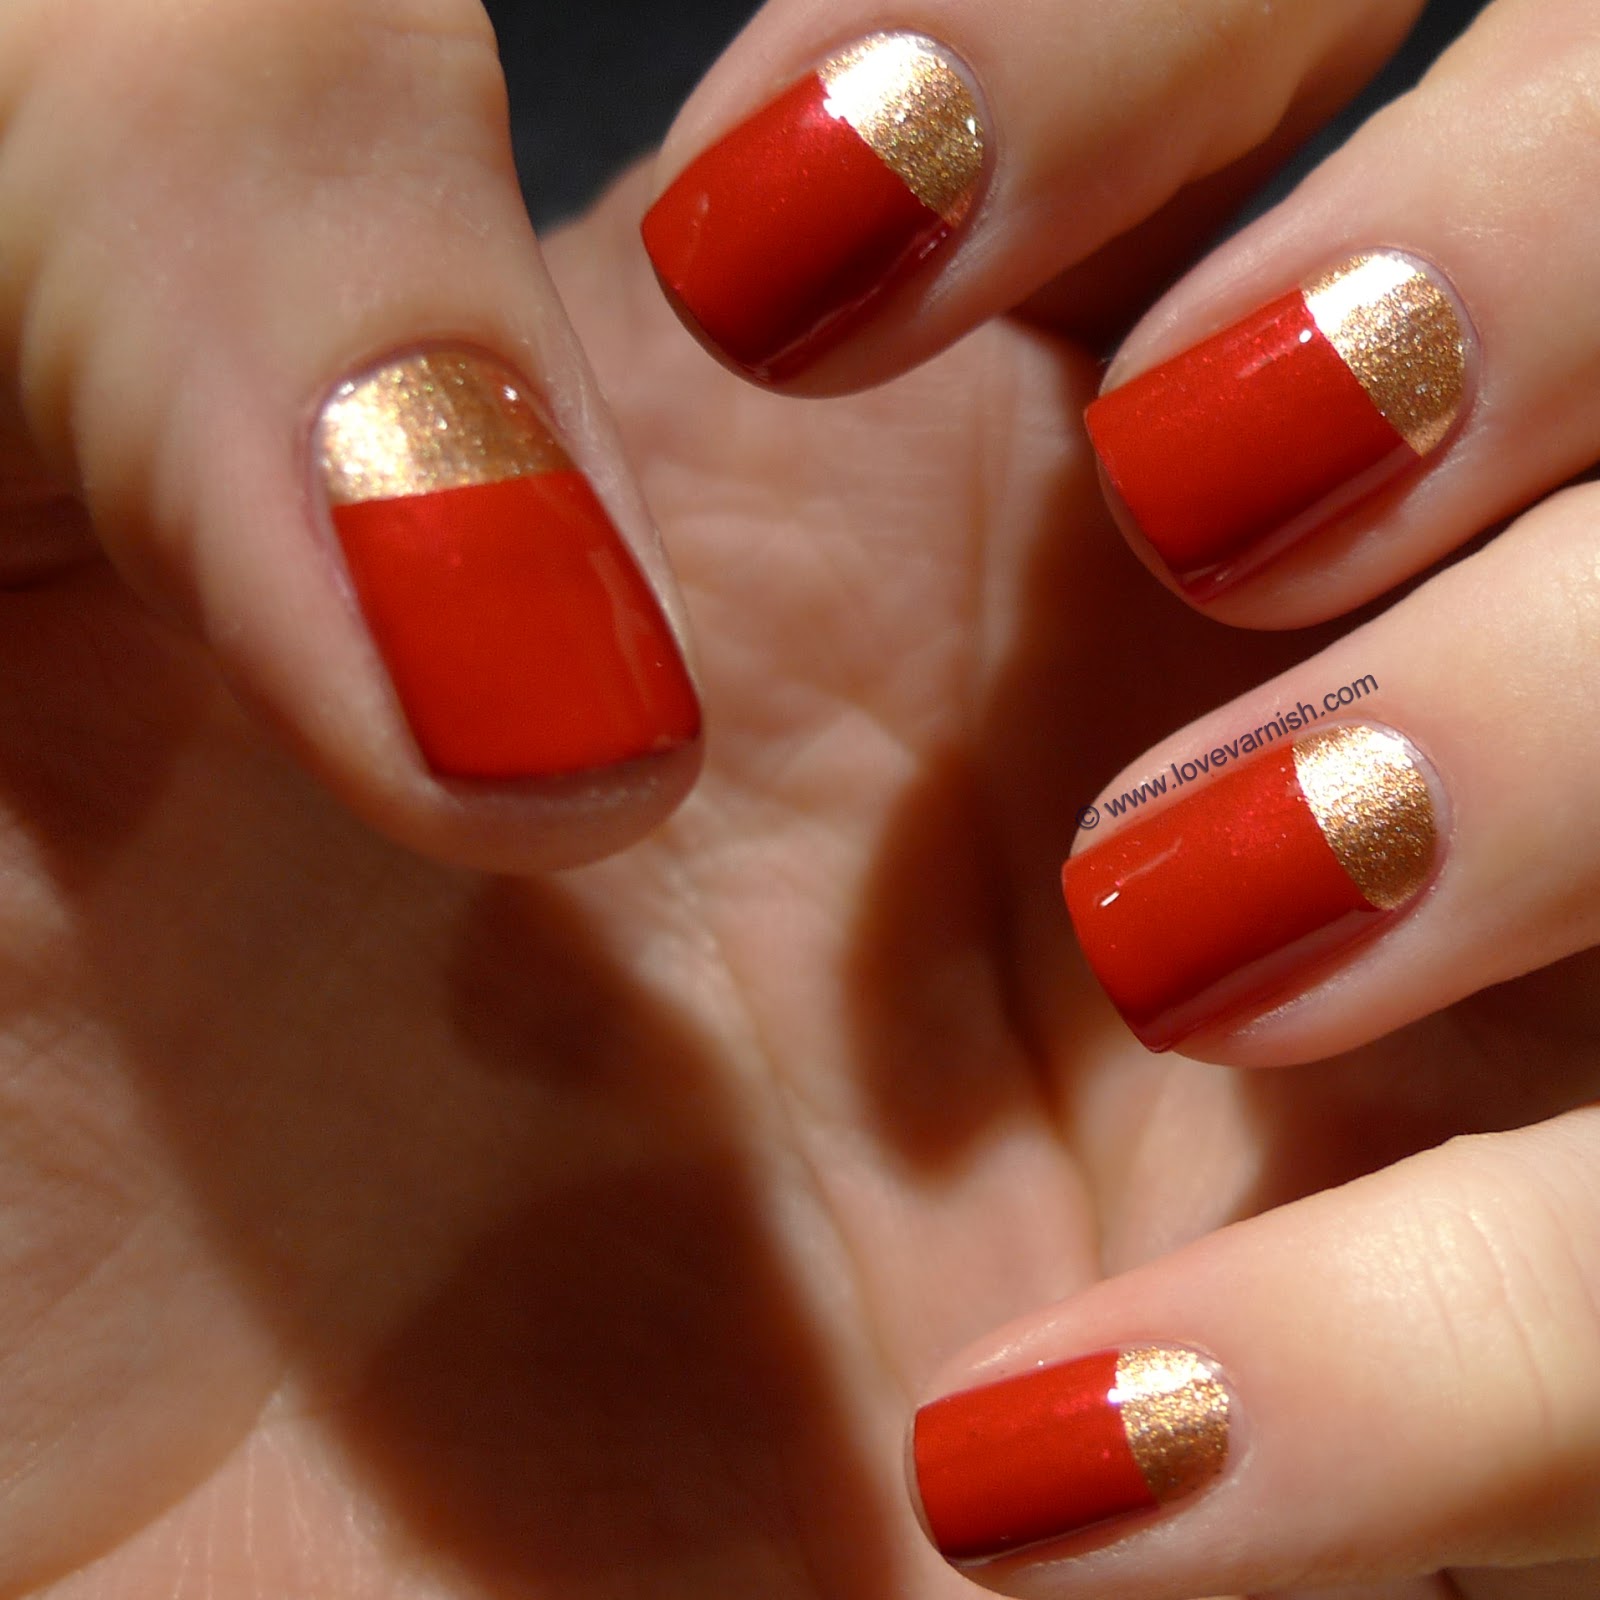 Deborah's manicure - Gold and red half moons